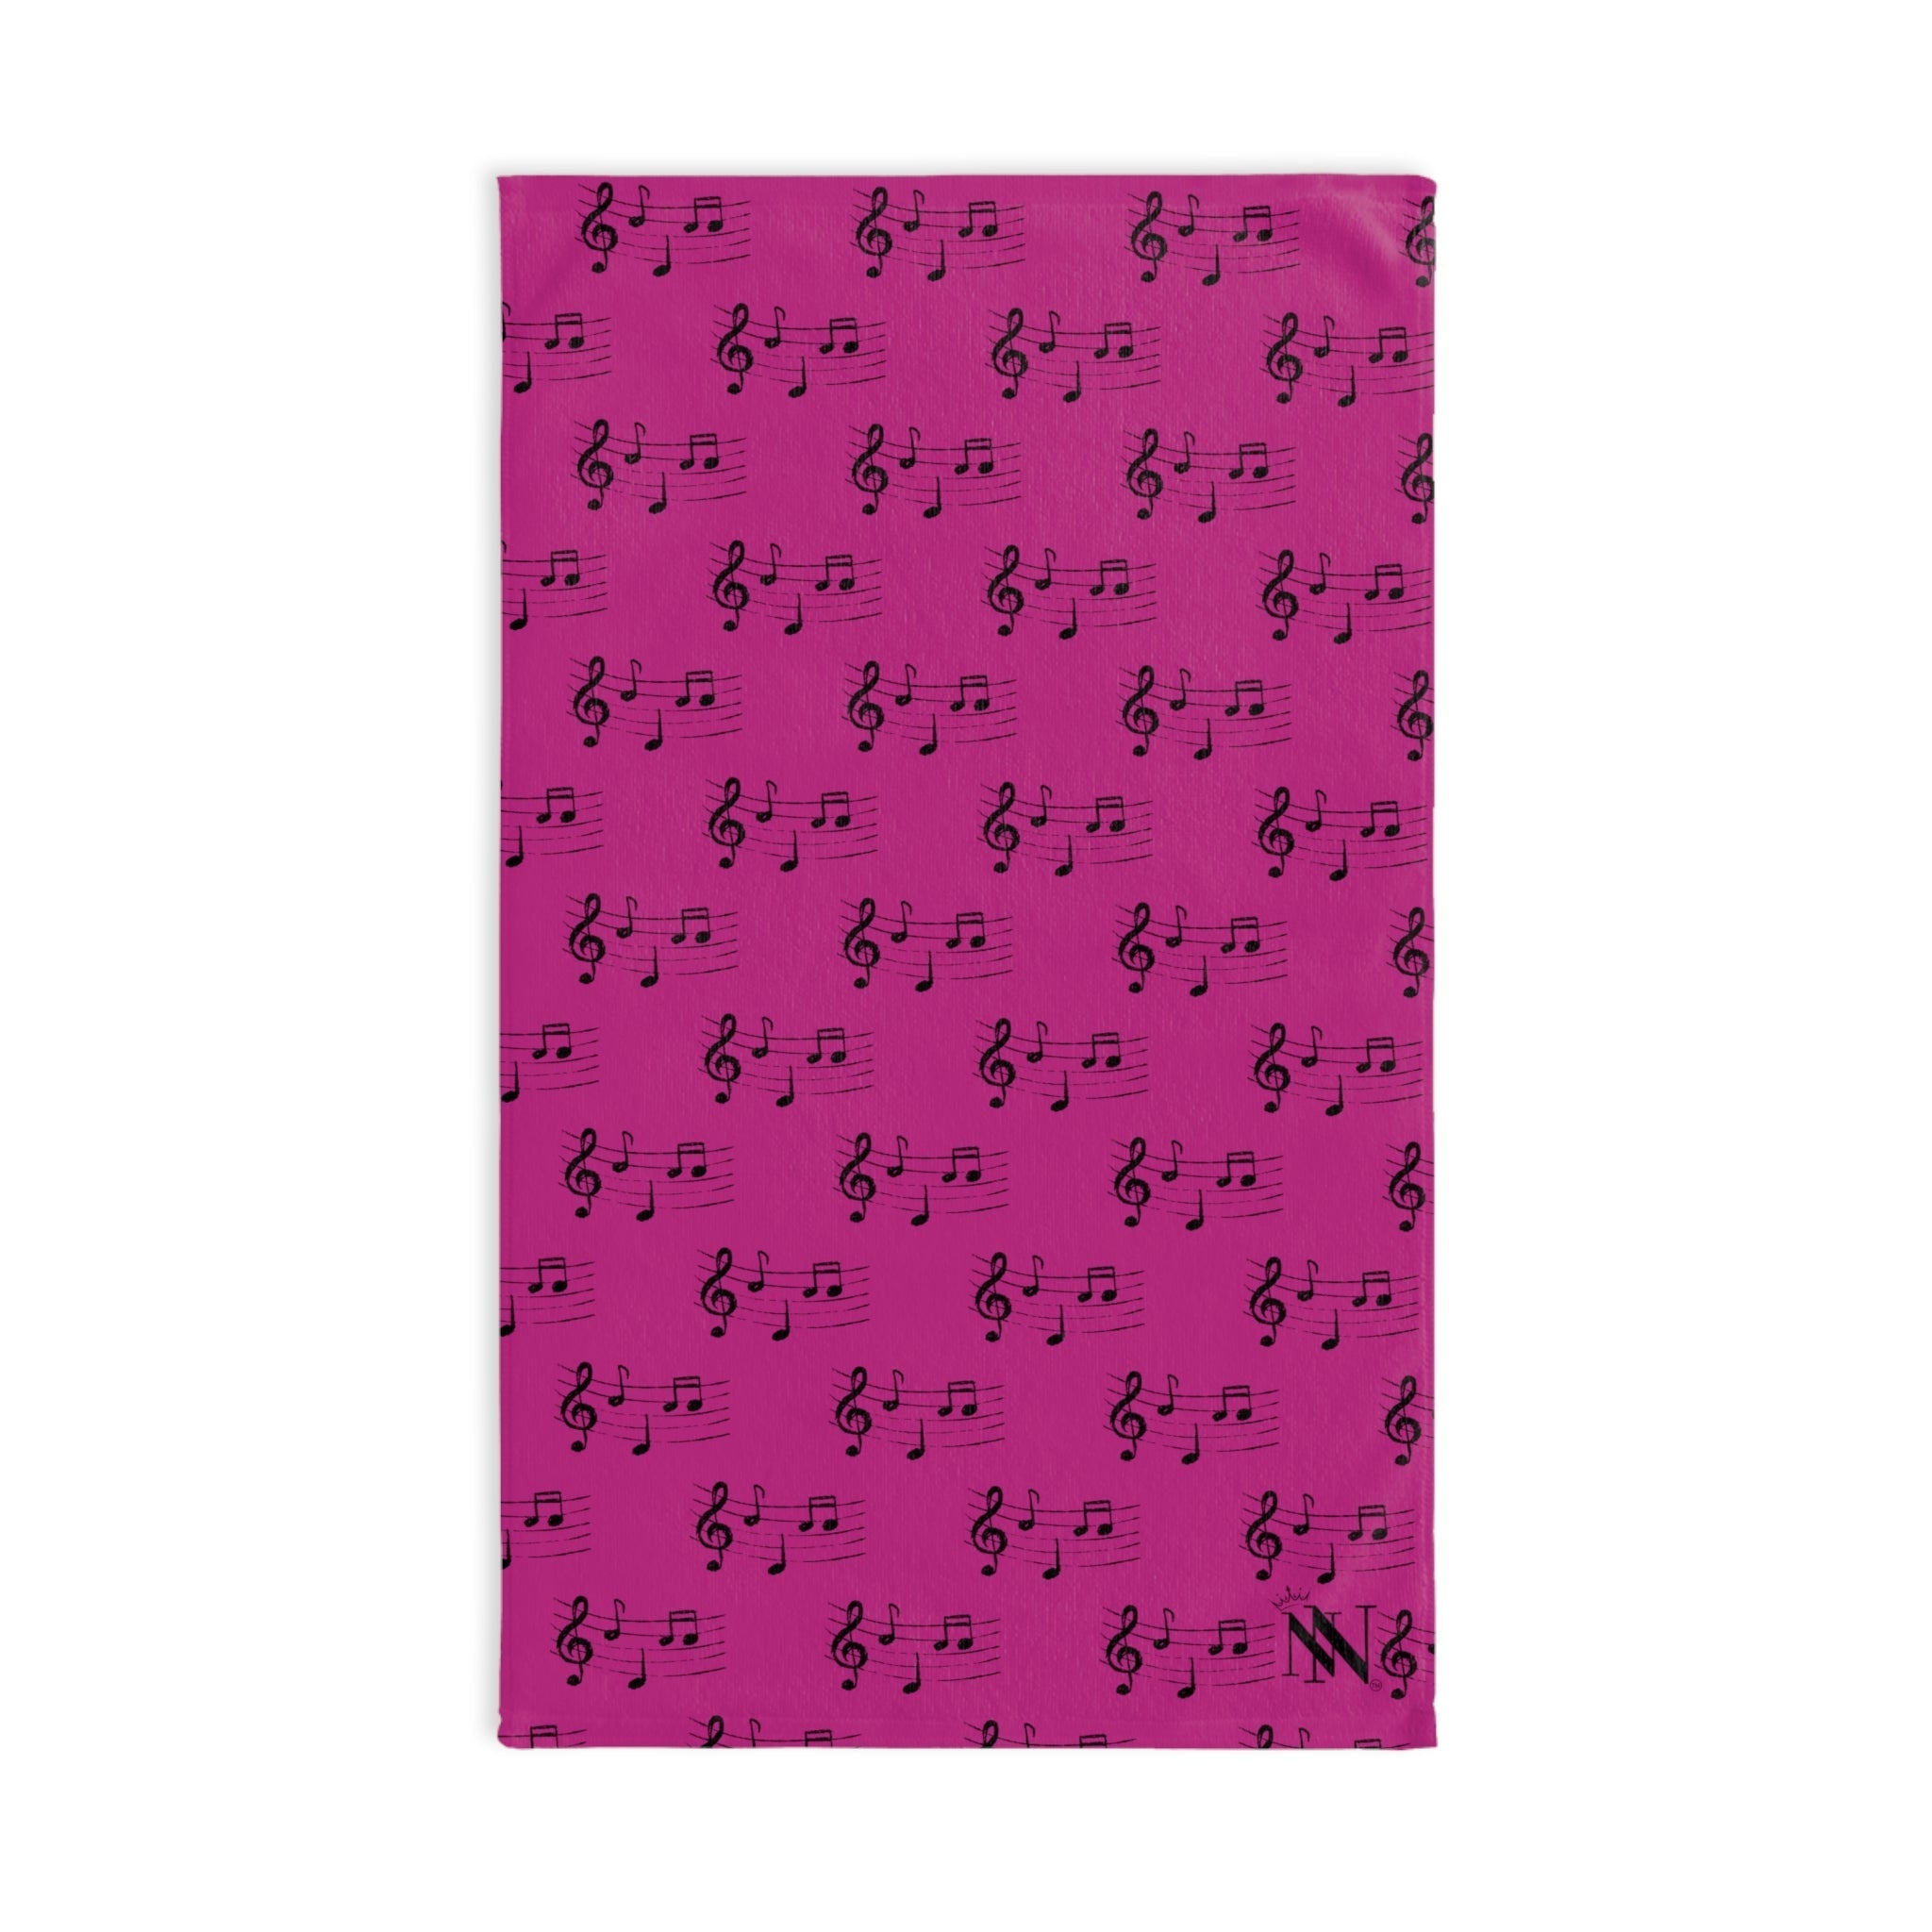 Black Love Notes Fuscia | Funny Gifts for Men - Gifts for Him - Birthday Gifts for Men, Him, Husband, Boyfriend, New Couple Gifts, Fathers & Valentines Day Gifts, Hand Towels NECTAR NAPKINS